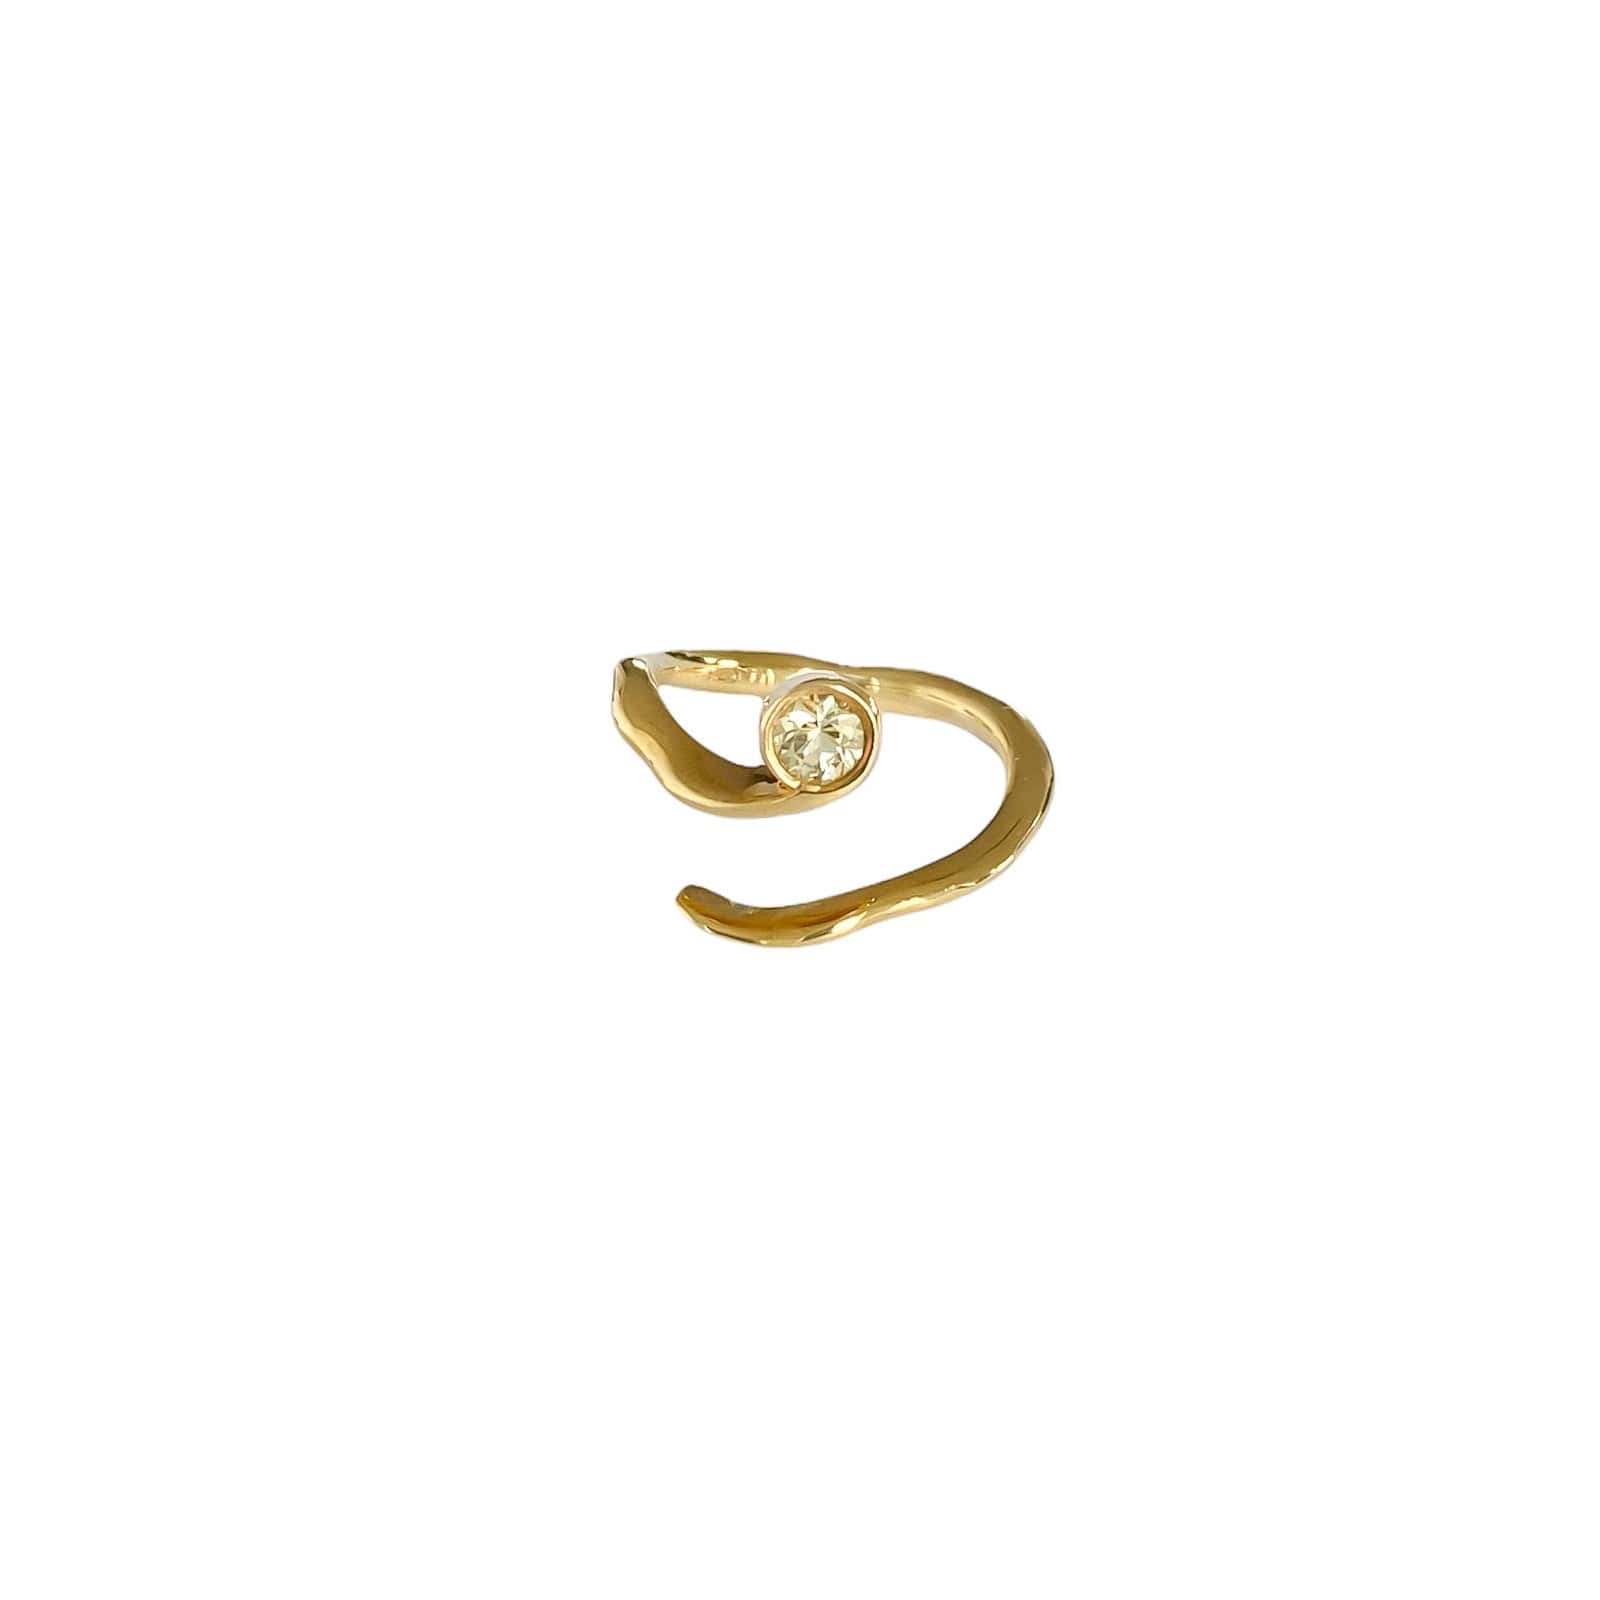 Simone Noa Spirulina gold plated silver sapphire ring, side view.